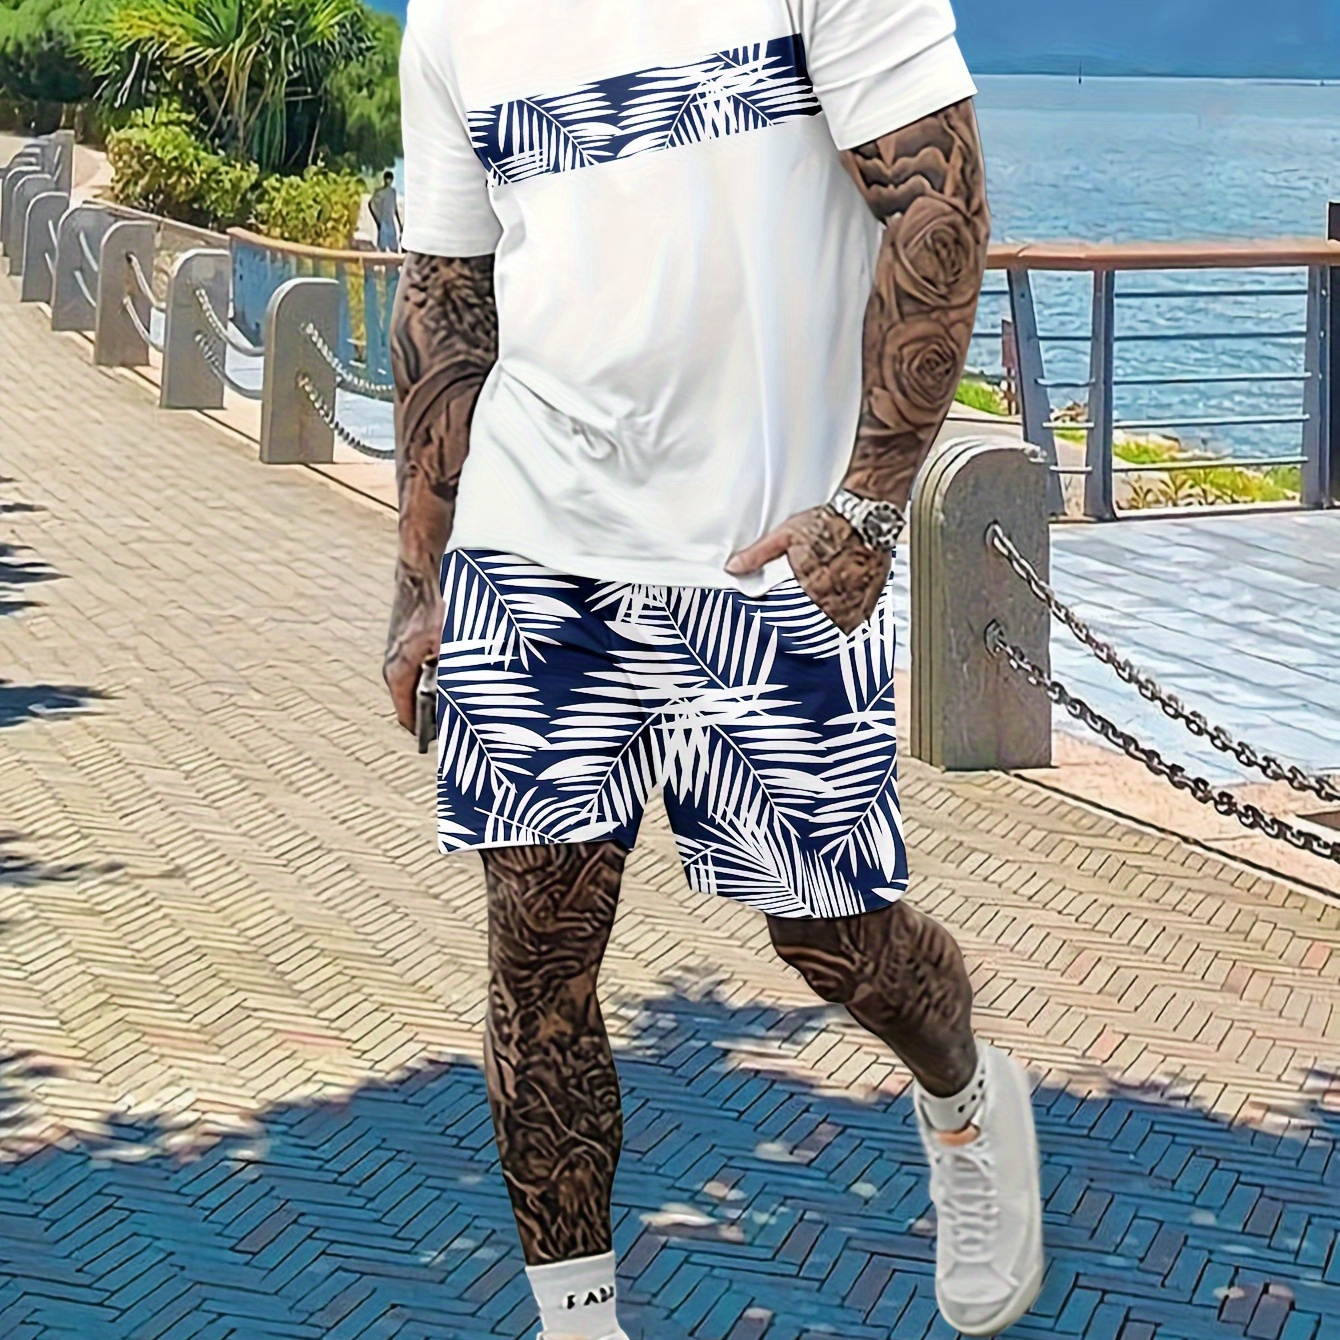 

2-piece Men's Leaves Pattern Outfit Set, Men's Color Block Short Sleeve Round Neck T-shirt & Casual Shorts Set For Summer Holiday